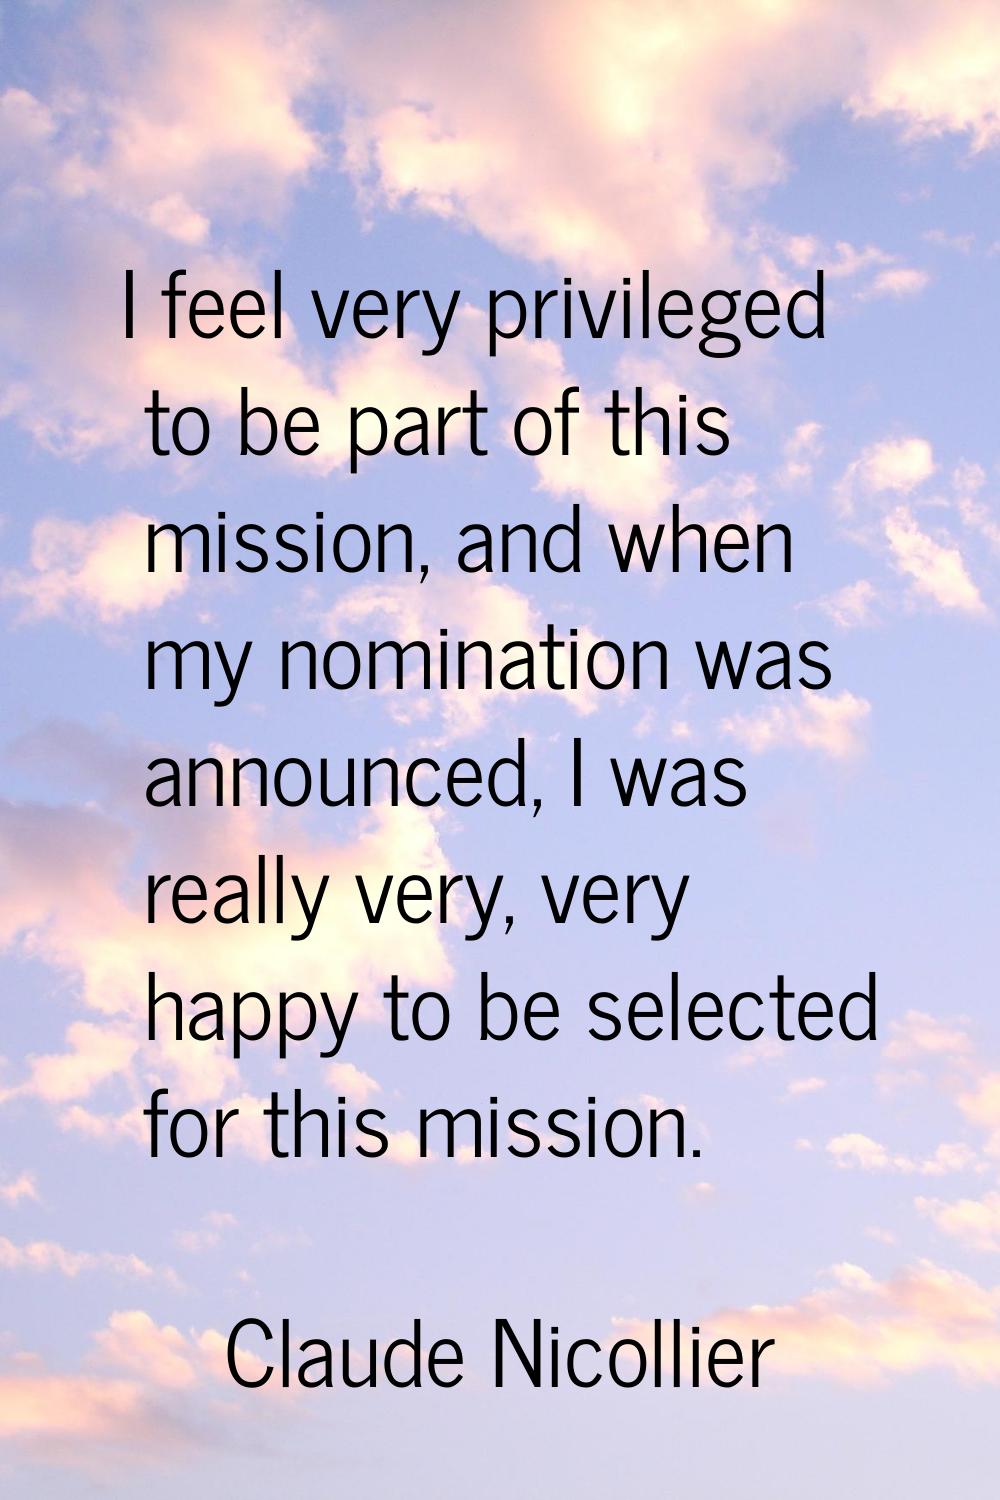 I feel very privileged to be part of this mission, and when my nomination was announced, I was real